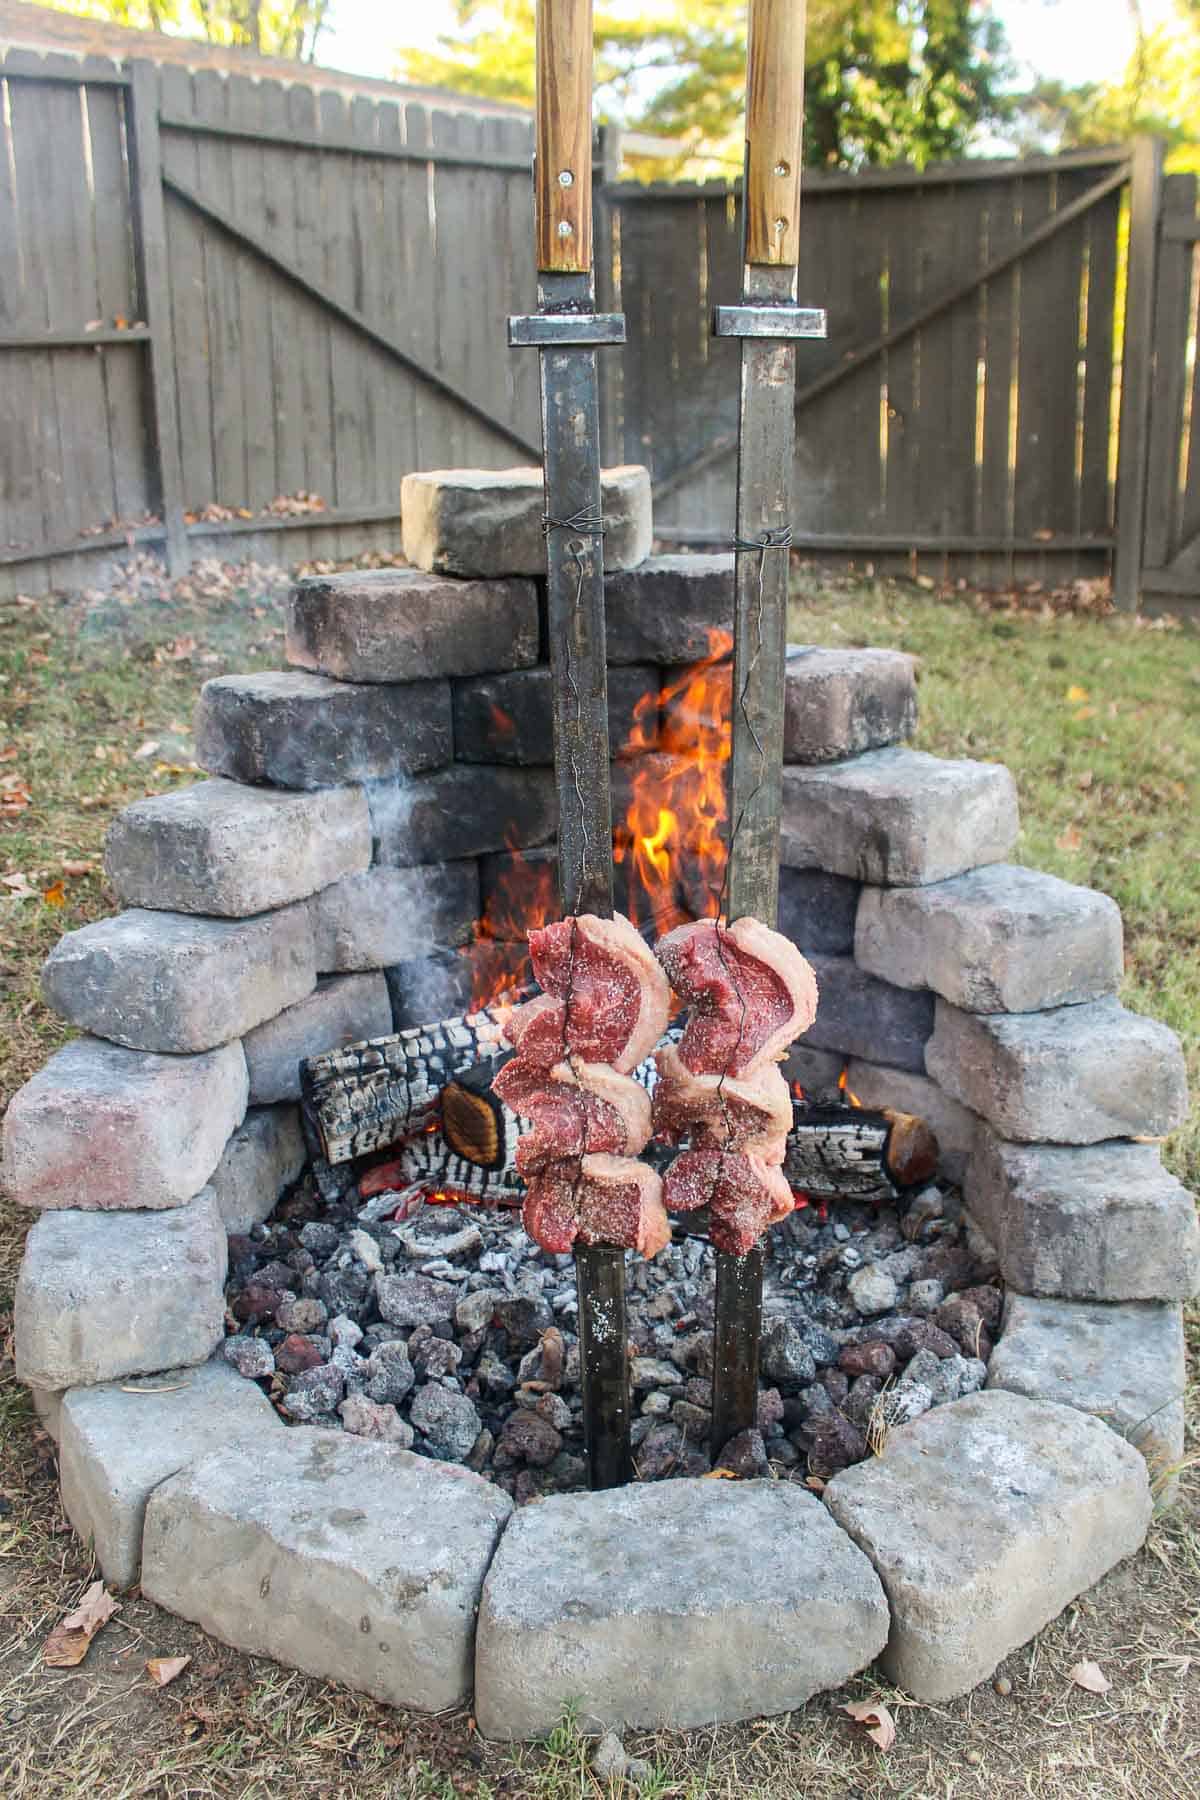 The skewered picanha sitting next to the flames.